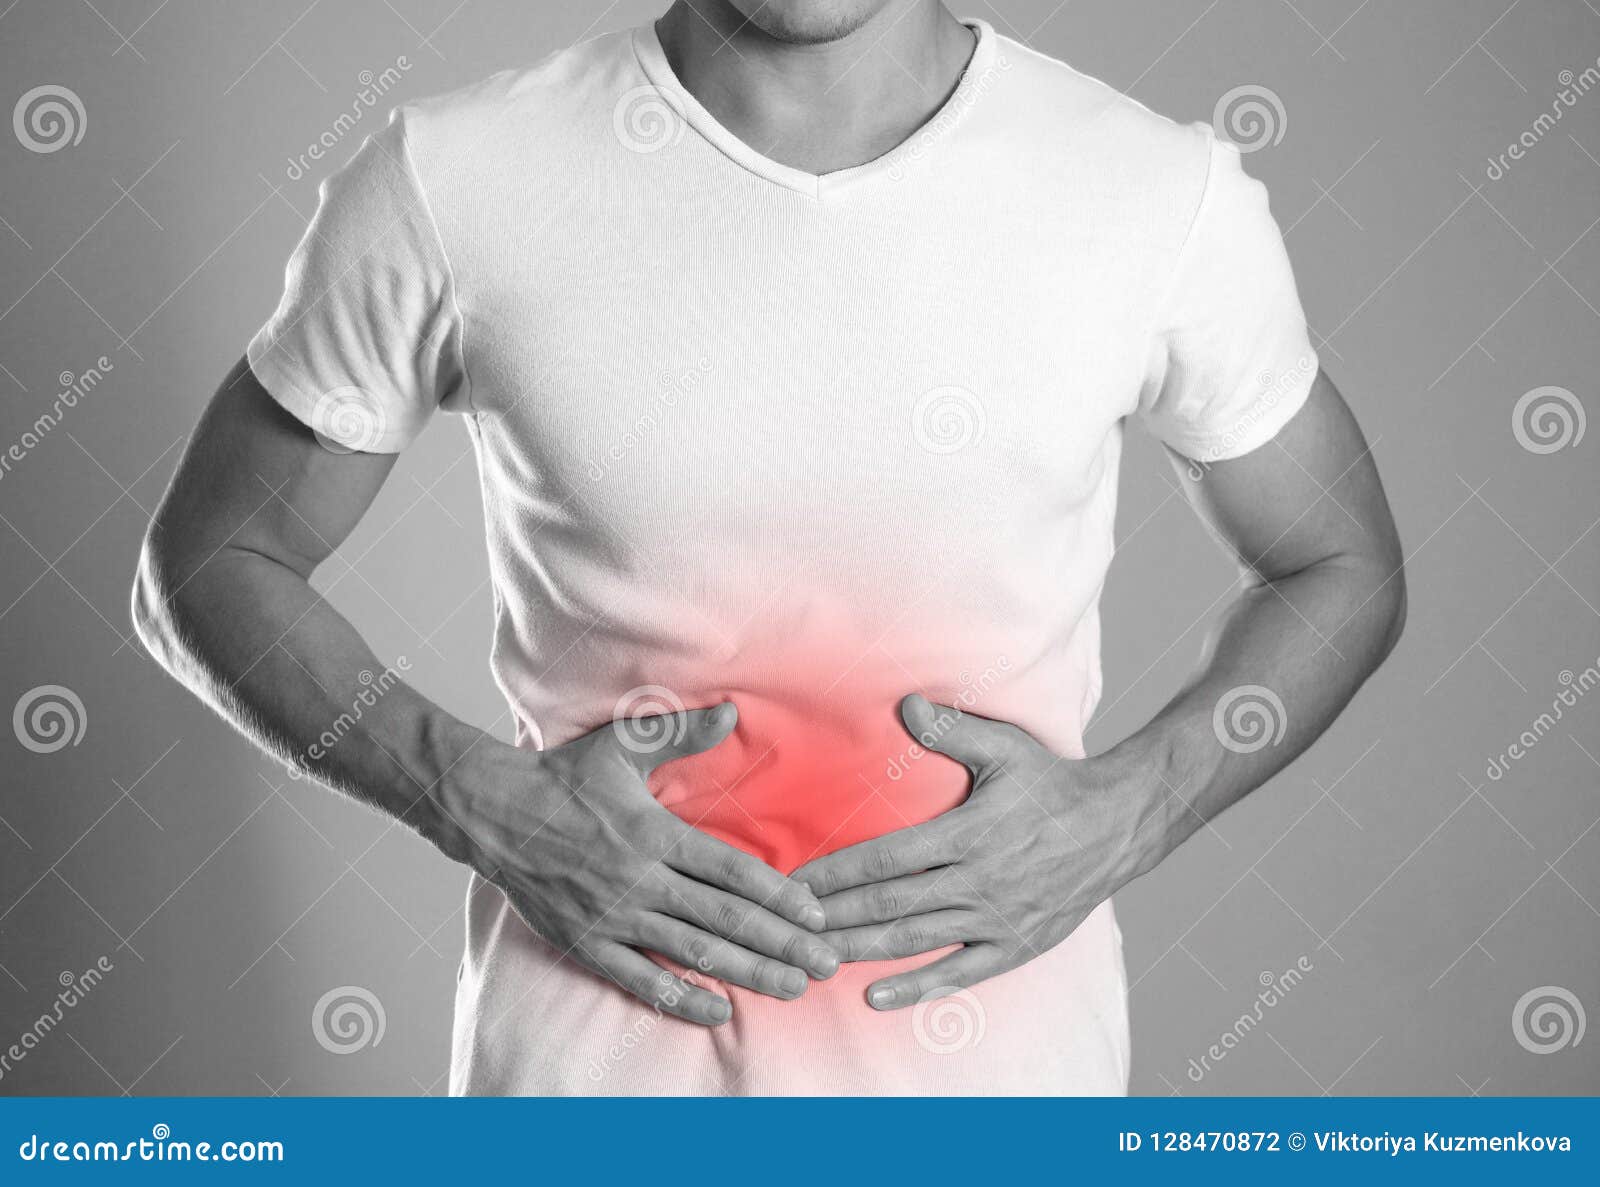 the man is holding his stomach. abdominal pain. the hearth is hi